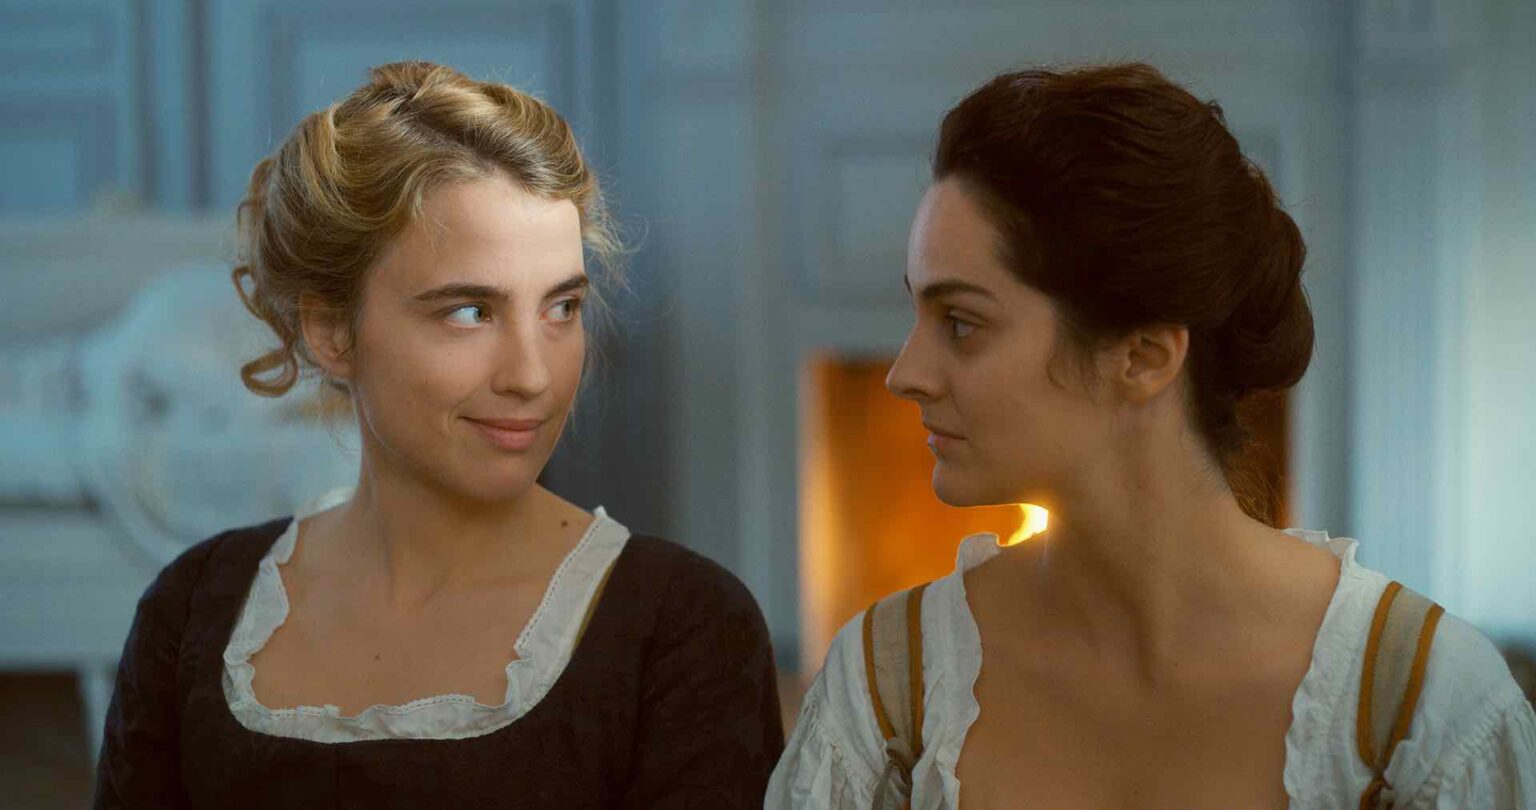 Looking for some lesbian movies to watch? We've compiled a list of some of the best lesbian foreign films you need to see.